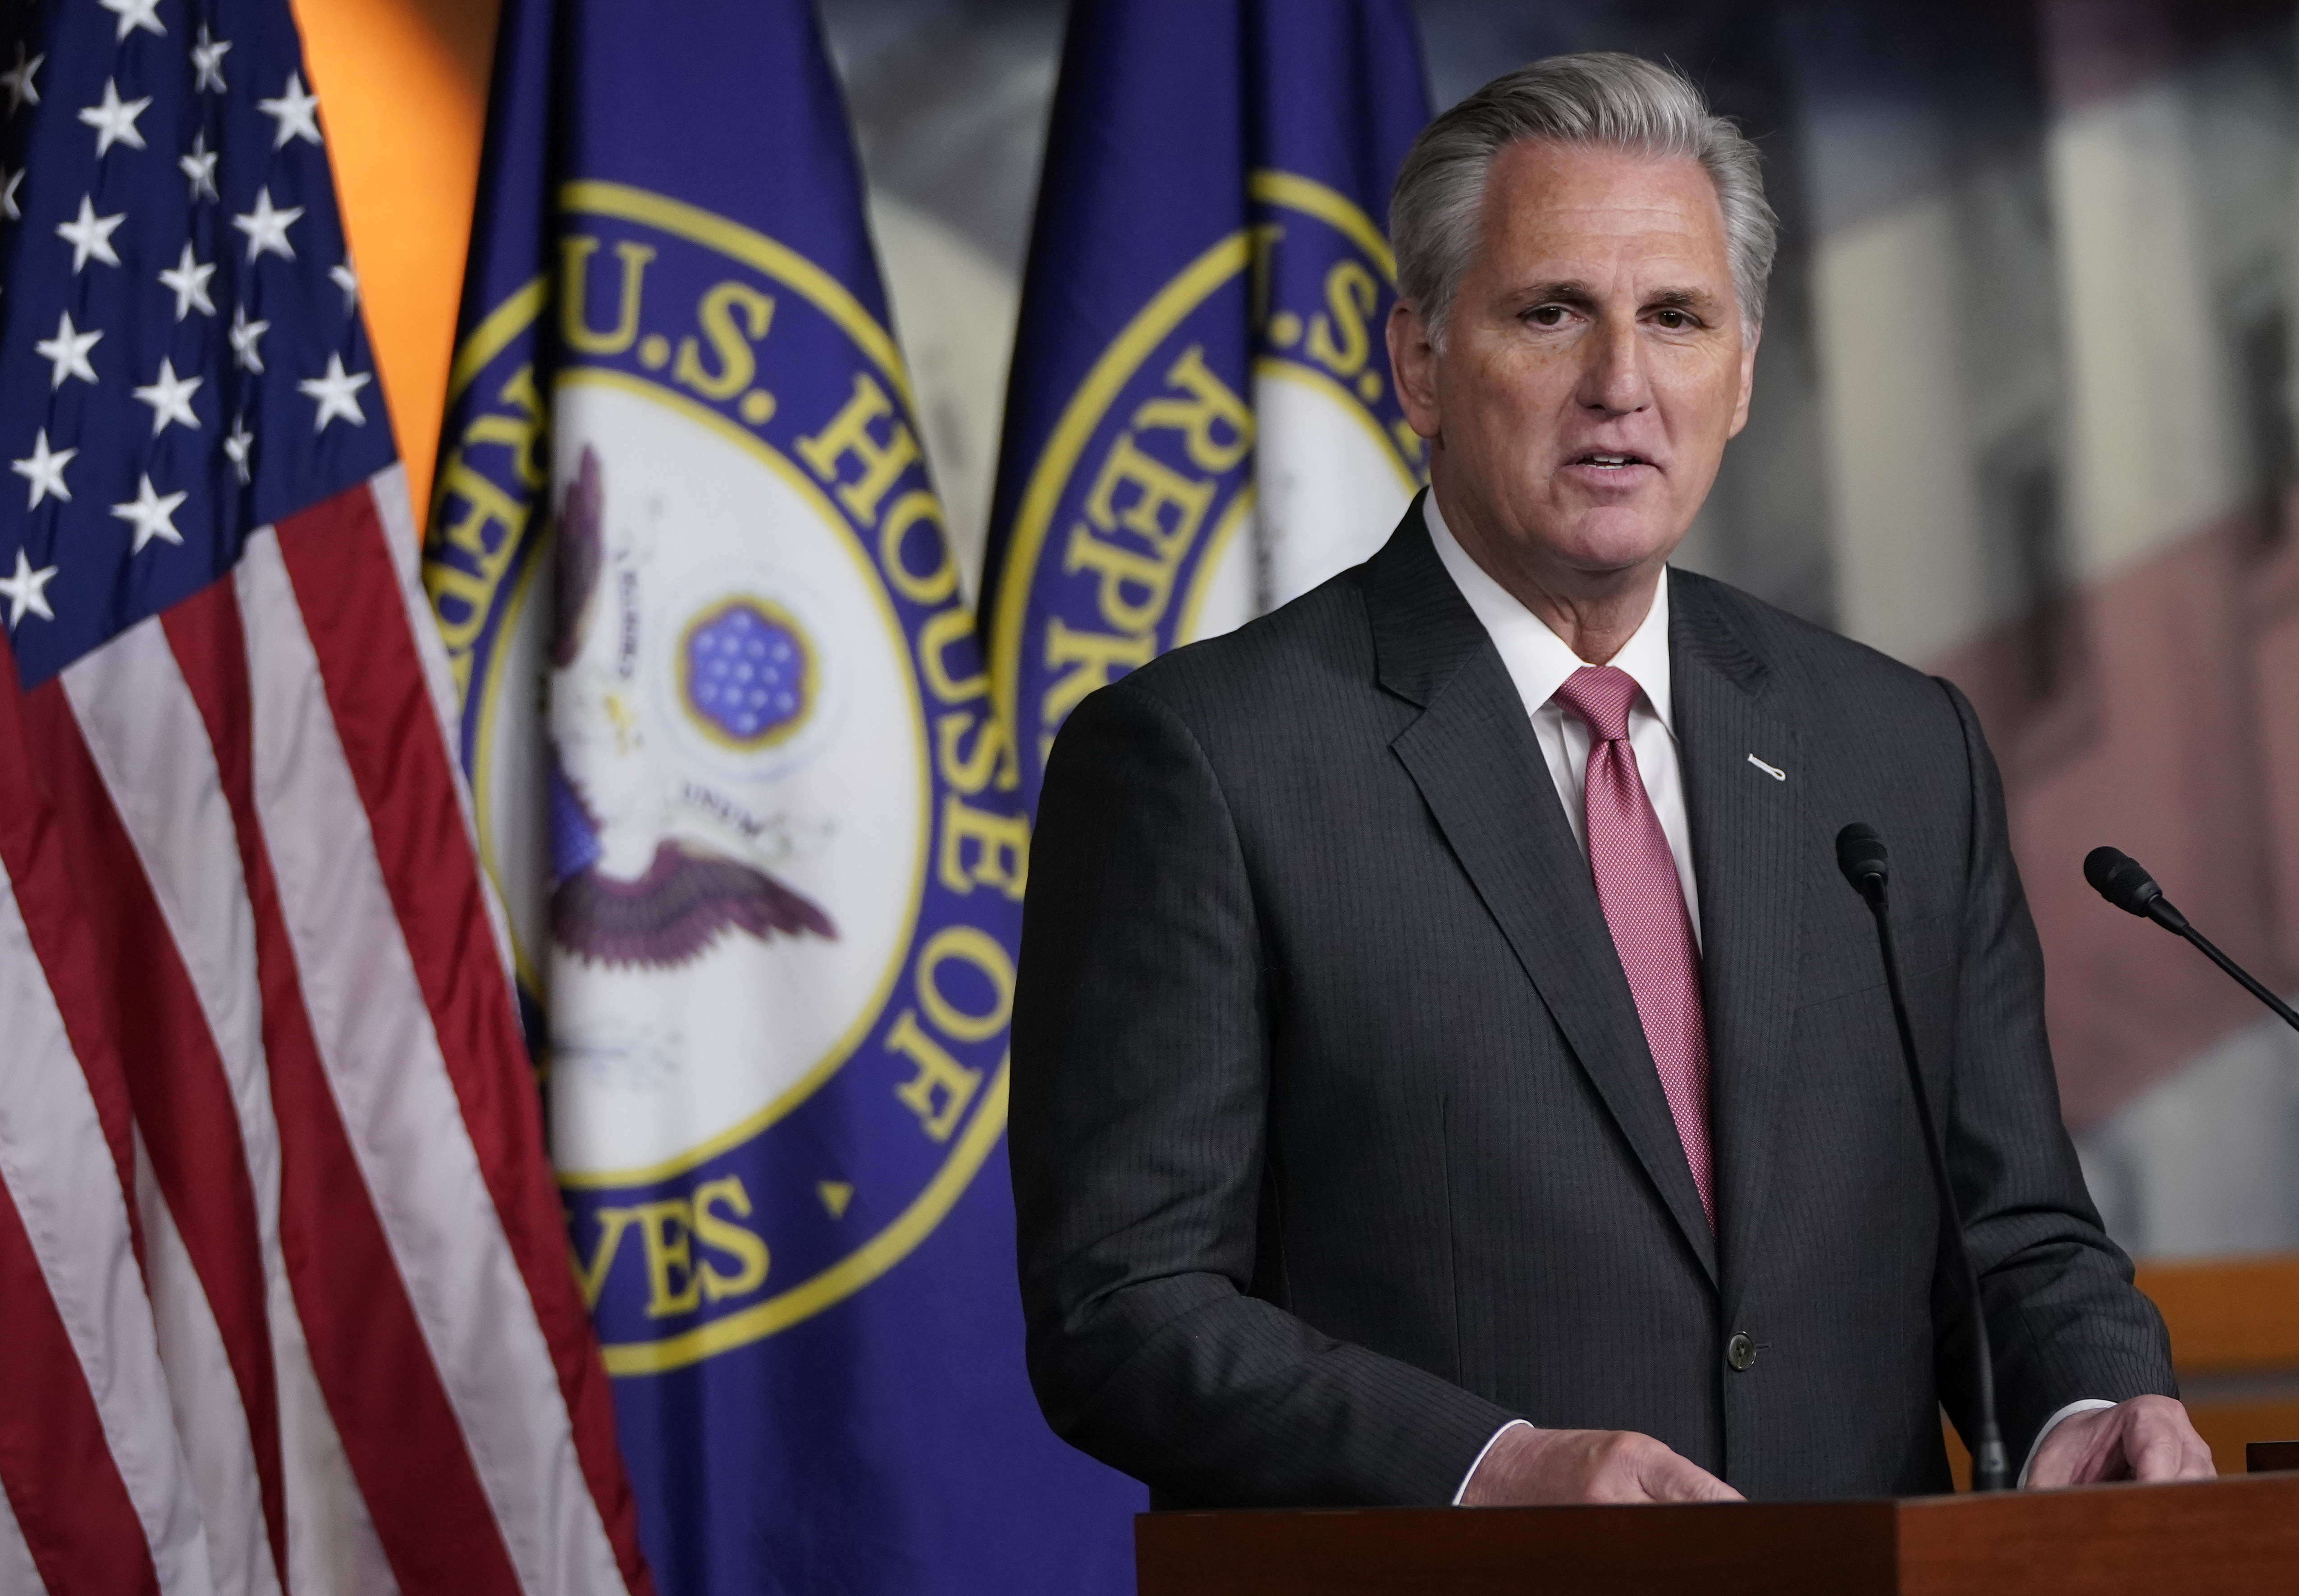 House Minority Leader Kevin McCarthy (R-CA) answers questions during a press conference at the U.S. Capitol on January 09, 2020 in Washington, DC. McCarthy answered a range of questions related primarily to the House articles of impeachment being sent to the U.S. Senate.